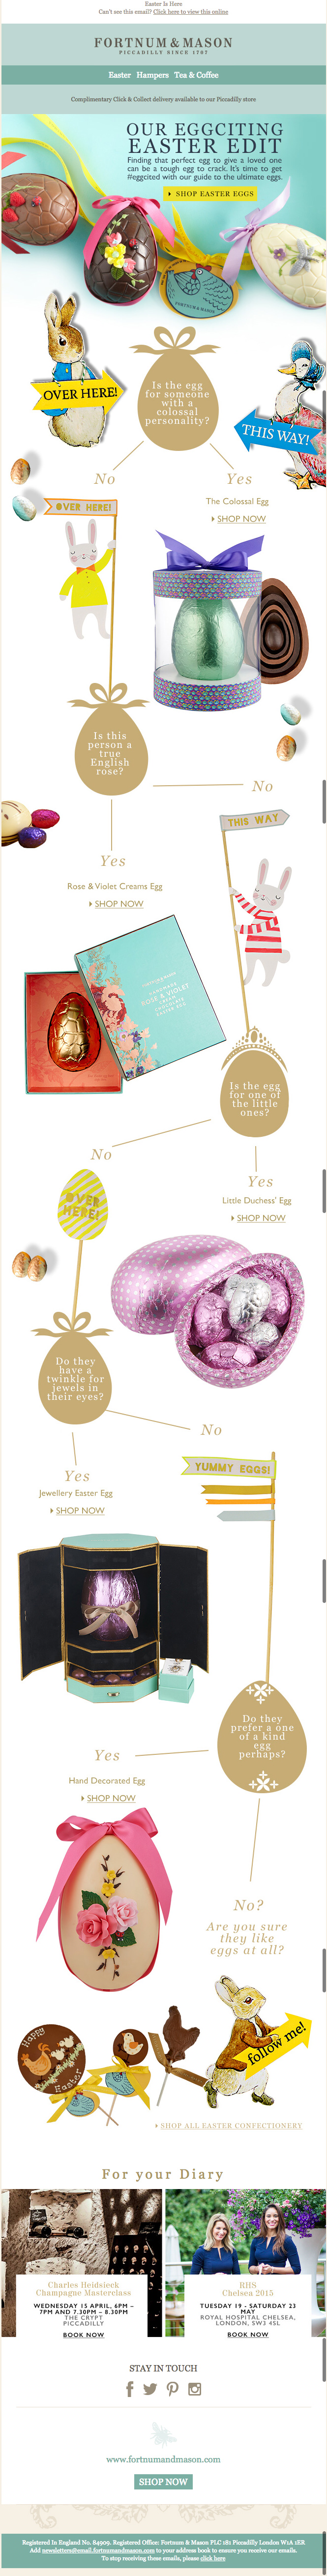 Easter email campaign inspiration - Fortnum Mason